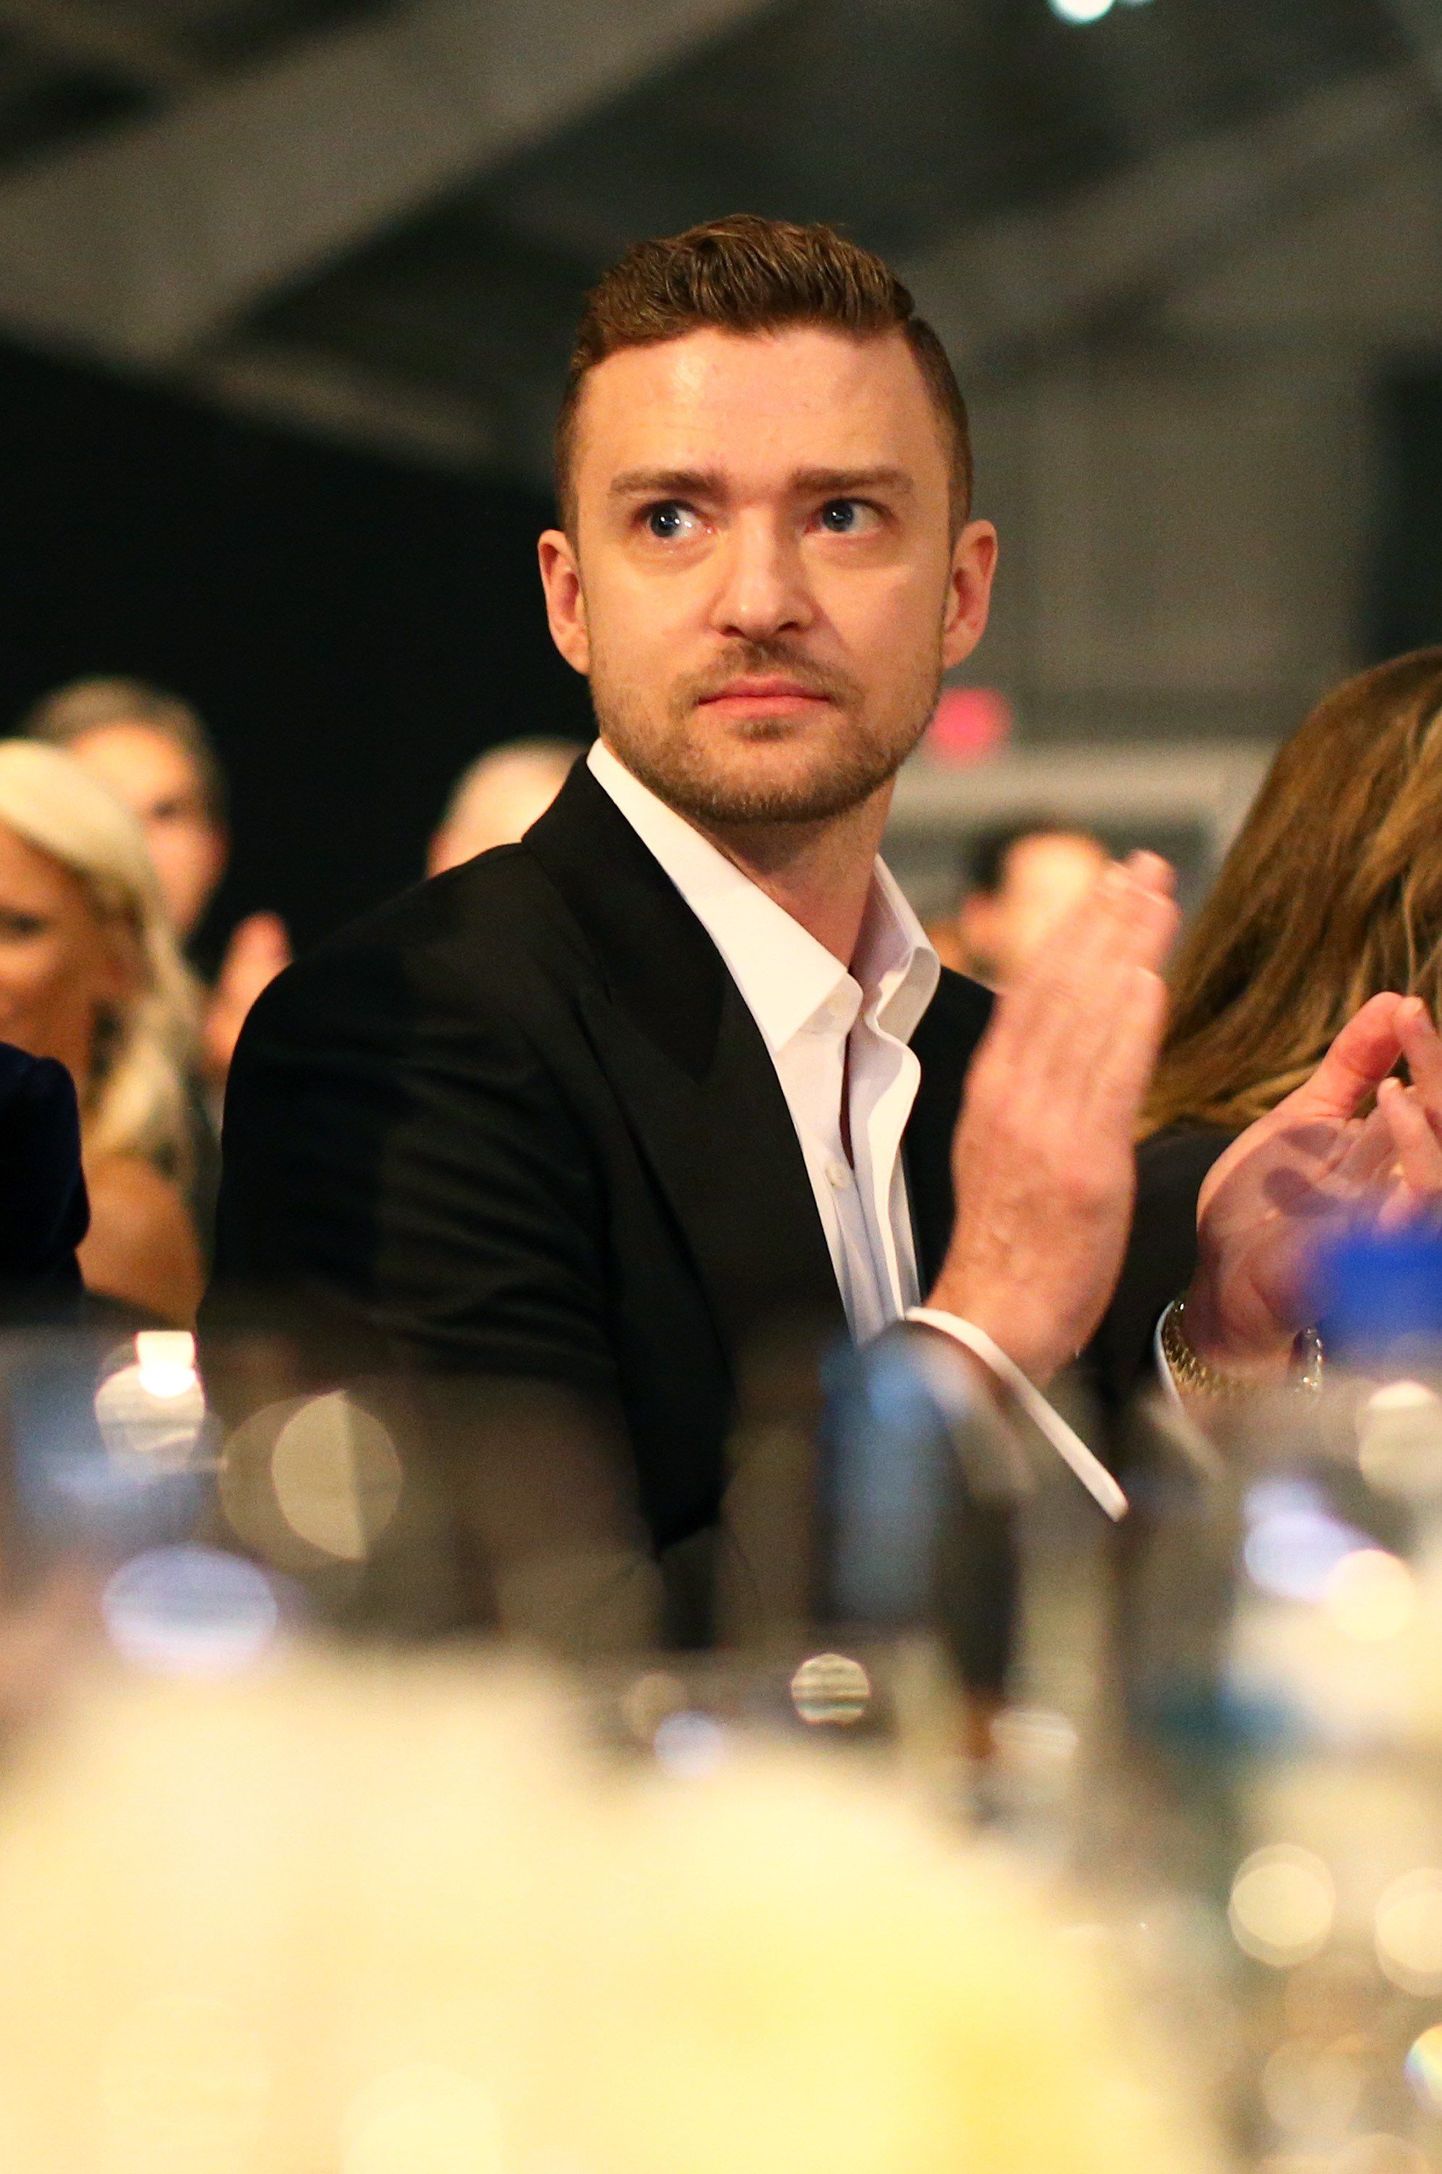 HOLLYWOOD, CA - OCTOBER 29: Singer Justin Timberlake attends amfAR LA Inspiration Gala honoring Tom Ford at Milk Studios on October 29, 2014 in Hollywood, California.   Christopher Polk/Getty Images for amfAR/AFP
== FOR NEWSPAPERS, INTERNET, TELCOS & TELEVISION USE ONLY ==